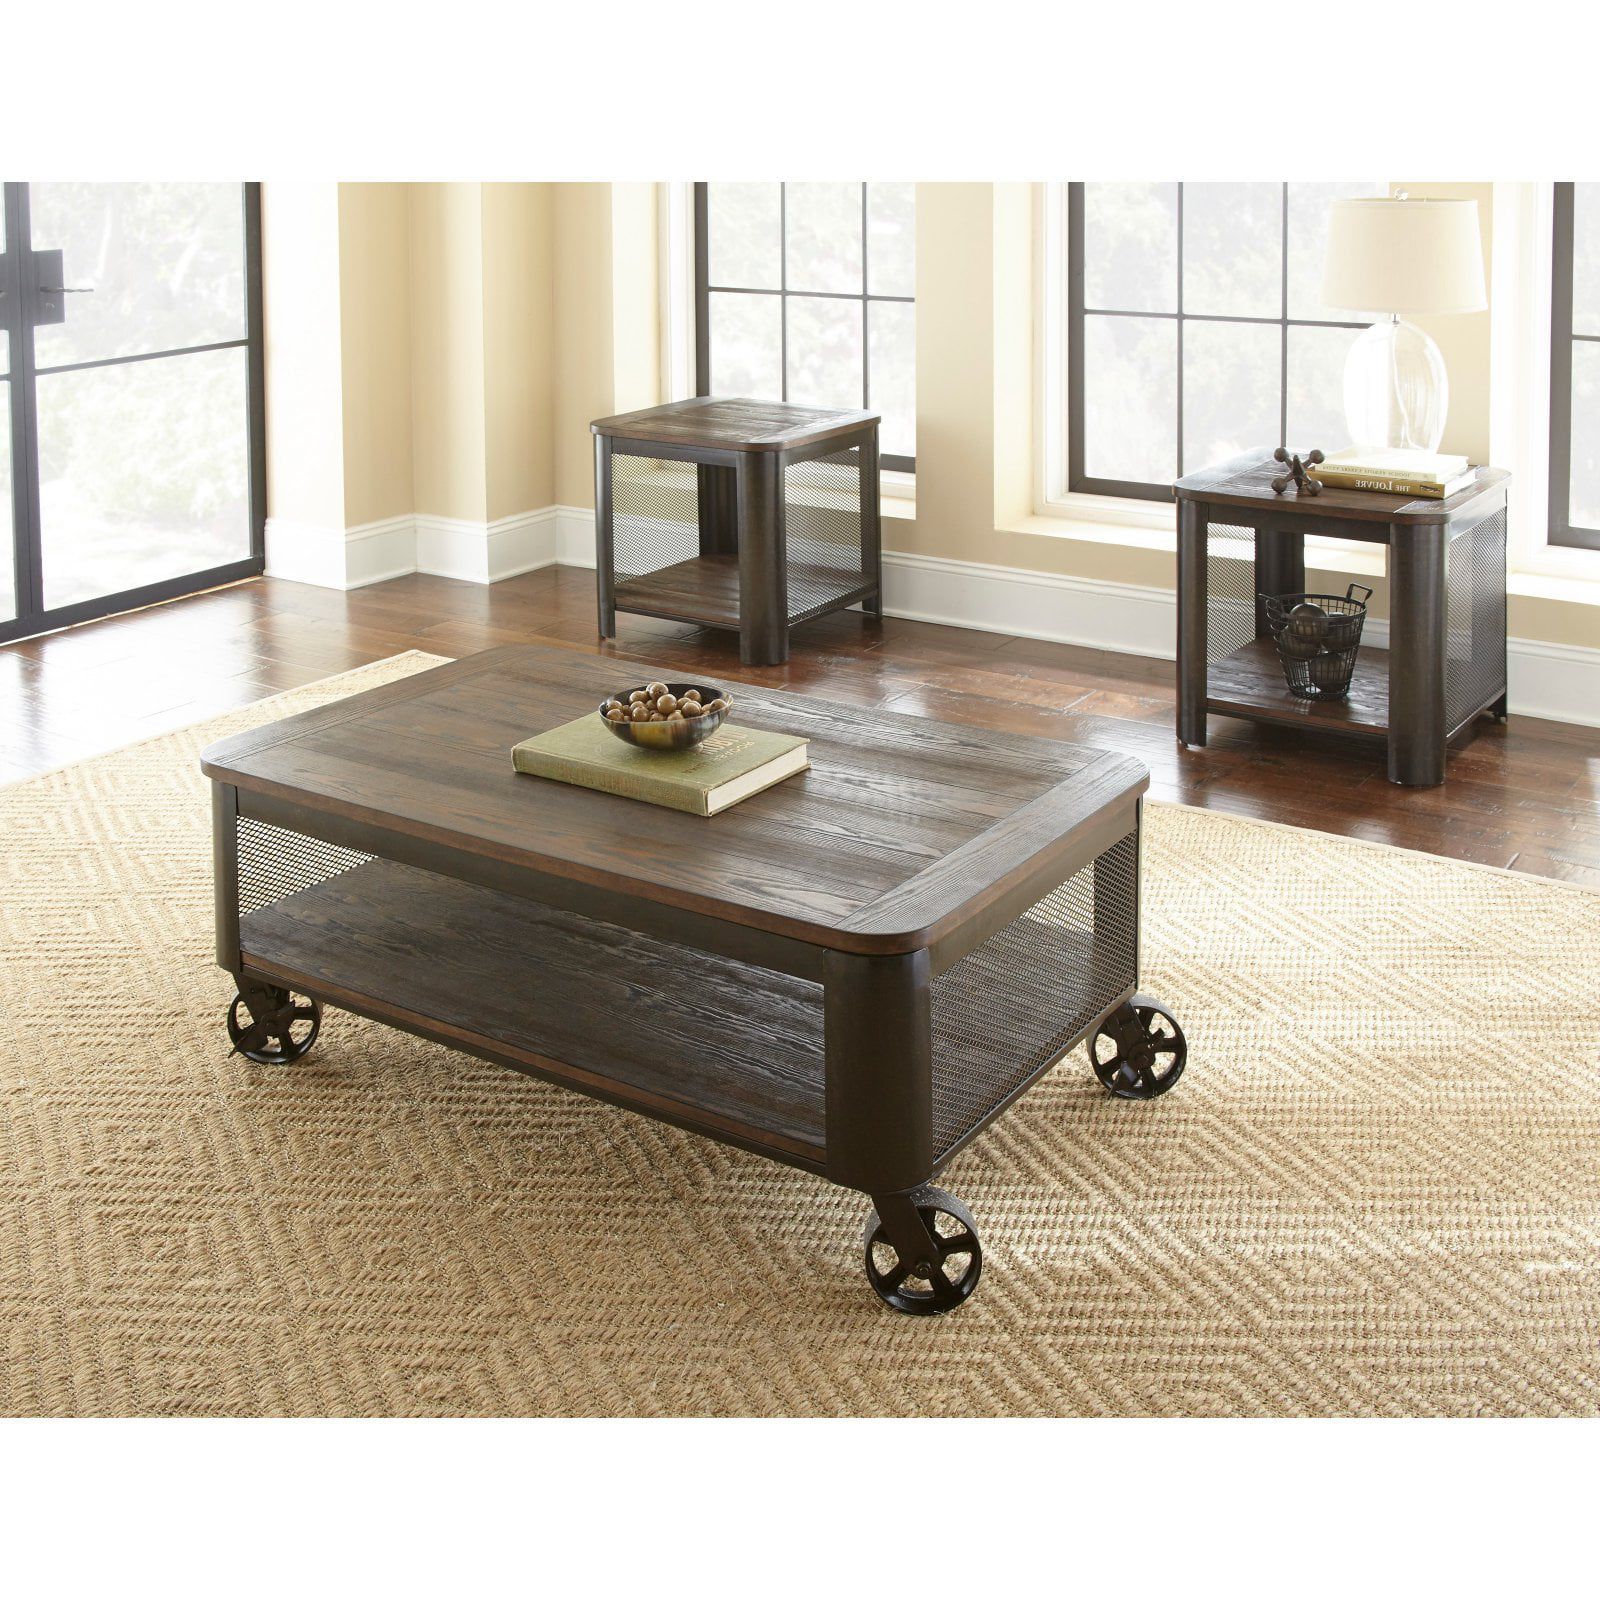 Barrow Lift Top Cocktail Table With Casters – Walmart In 2019 Coffee Tables With Casters (View 9 of 15)